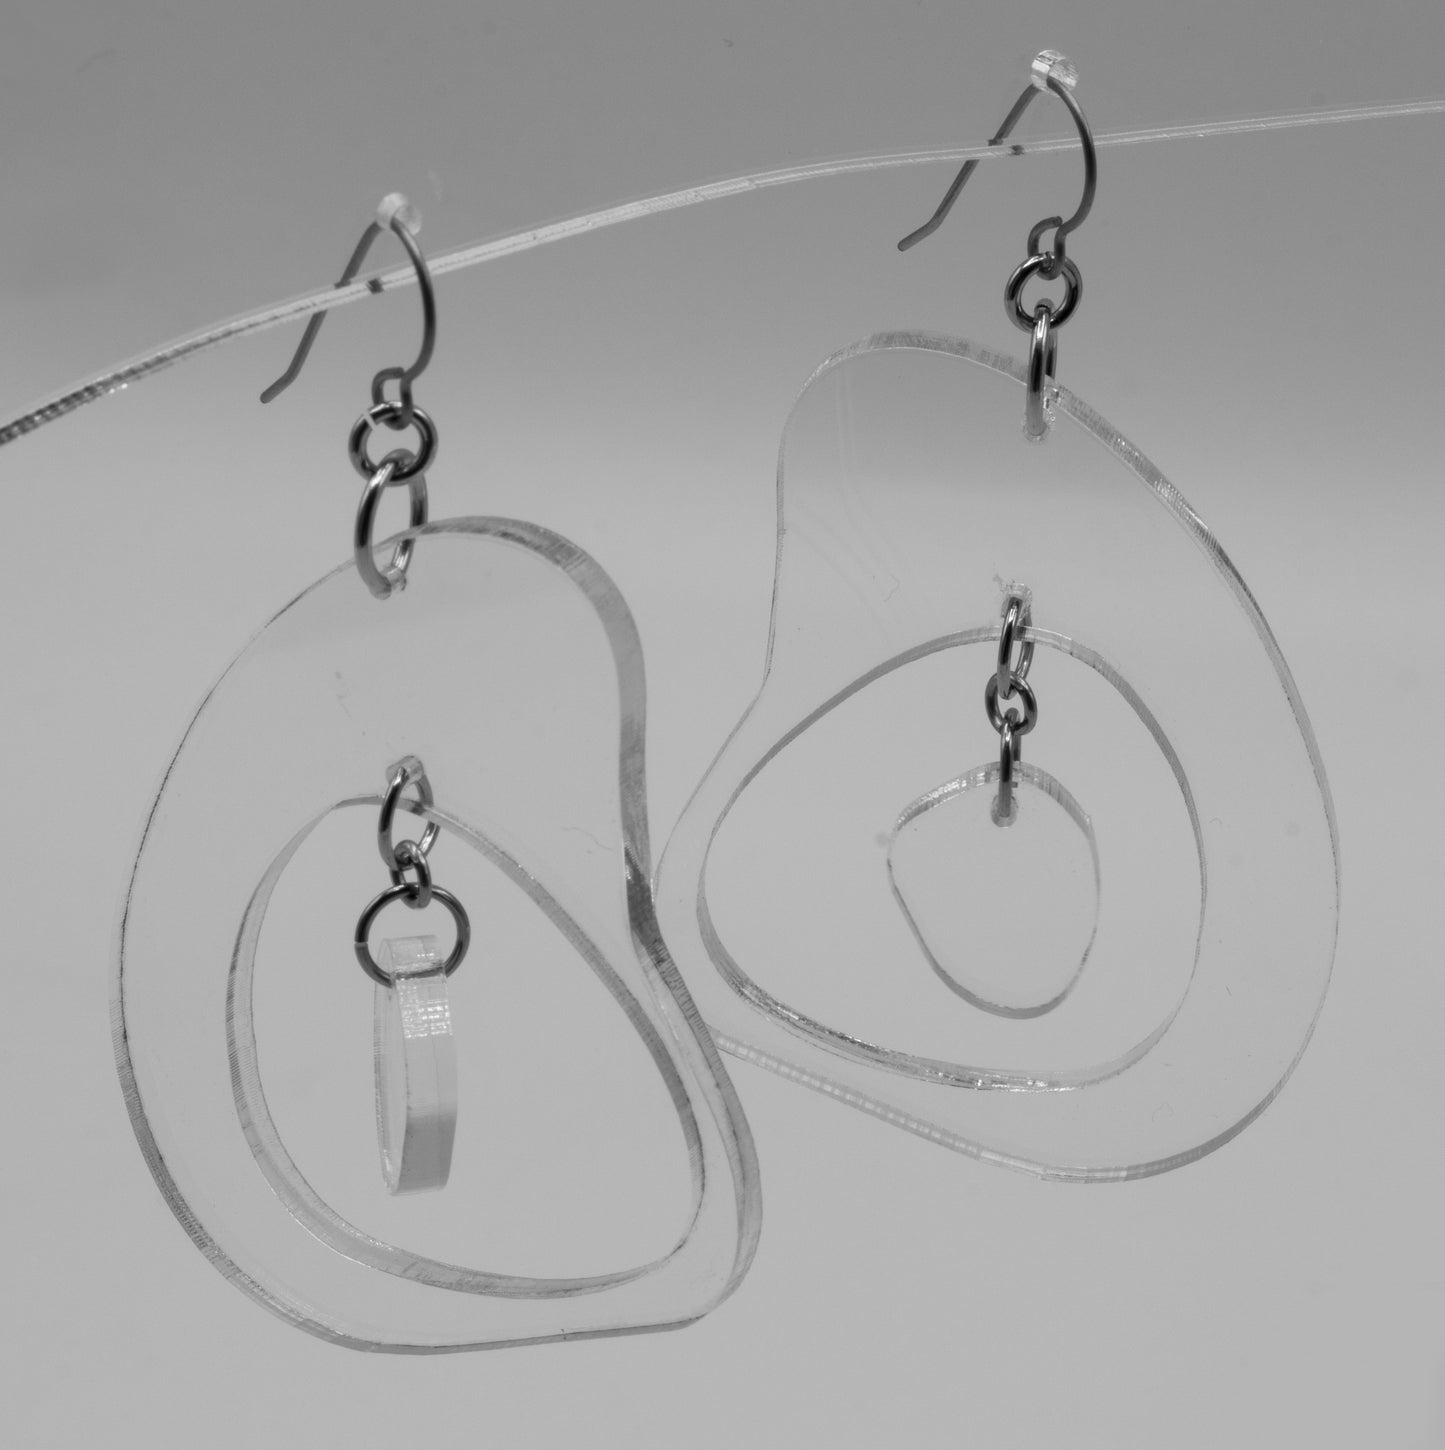 MODular Earrings - Boomerang Statement Earrings in Clear Acrylic by AtomicMobiles.com - retro era inspired mod handmade jewelry